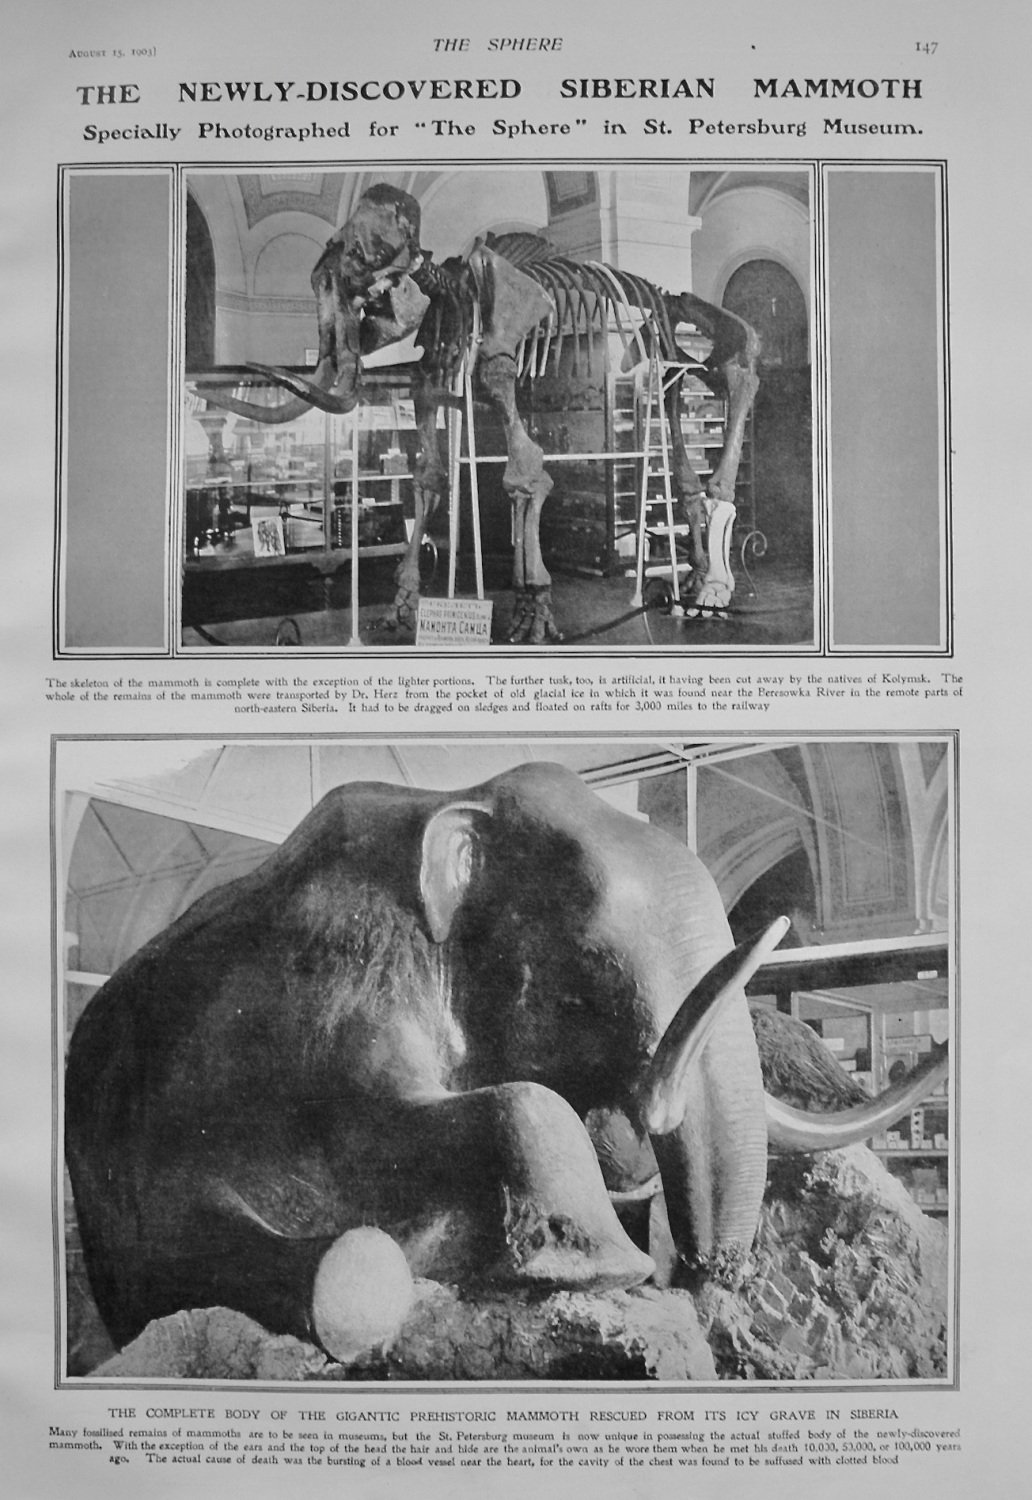 The Newly-Discovered Siberian Mammoth. 1903